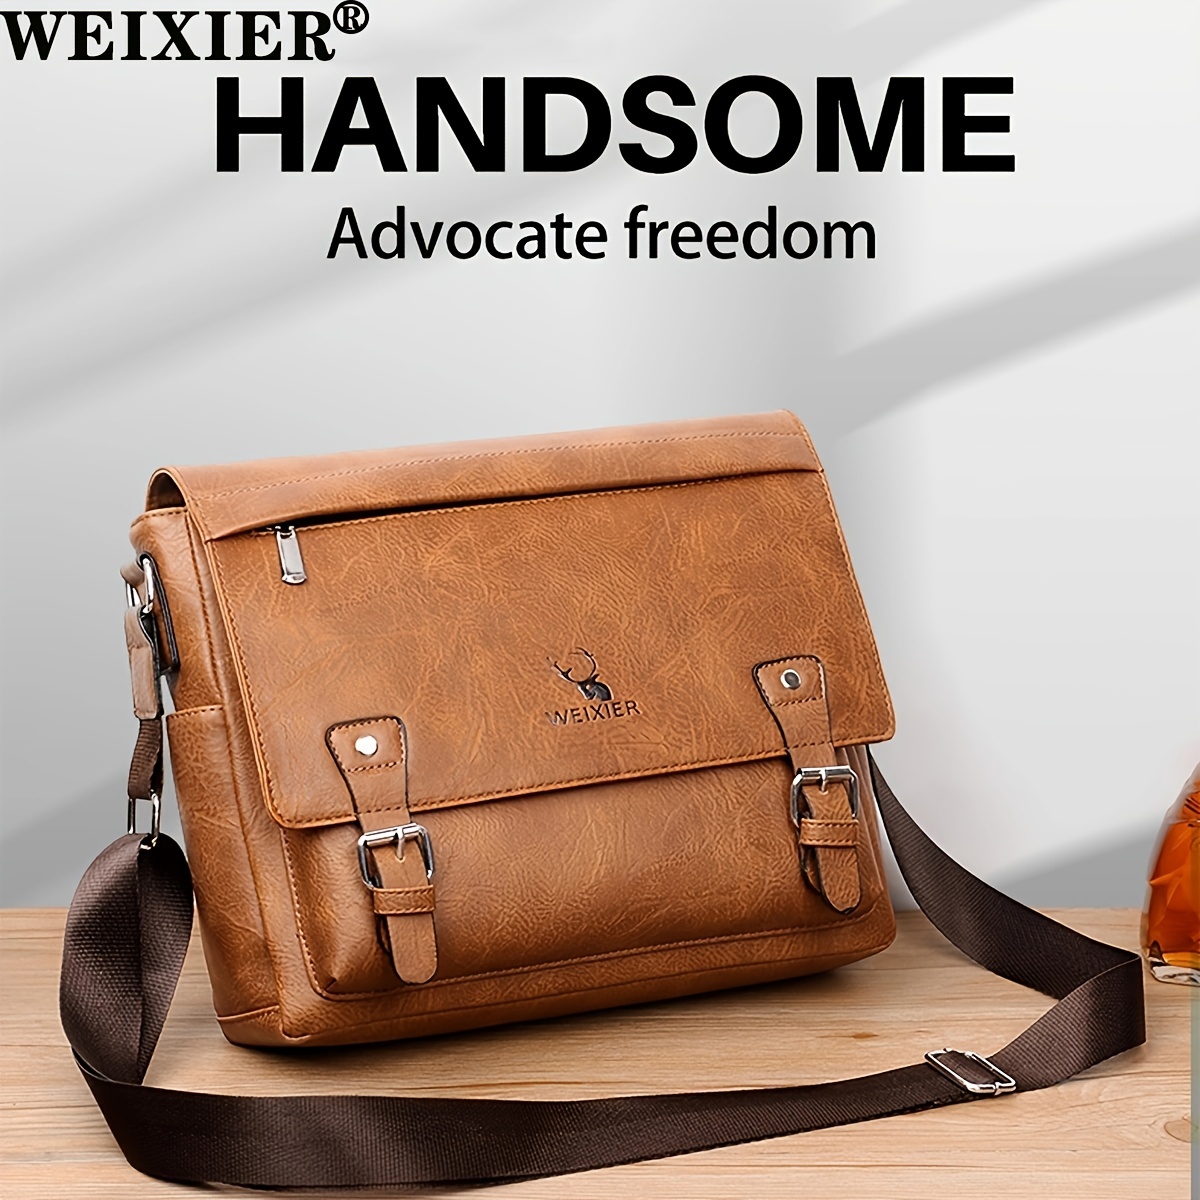 WEIXIER Men's Crossbody Bag Leather Small Business Shoulder Handbag for iPad 9.7 inch, Light Brown, Size: One Size